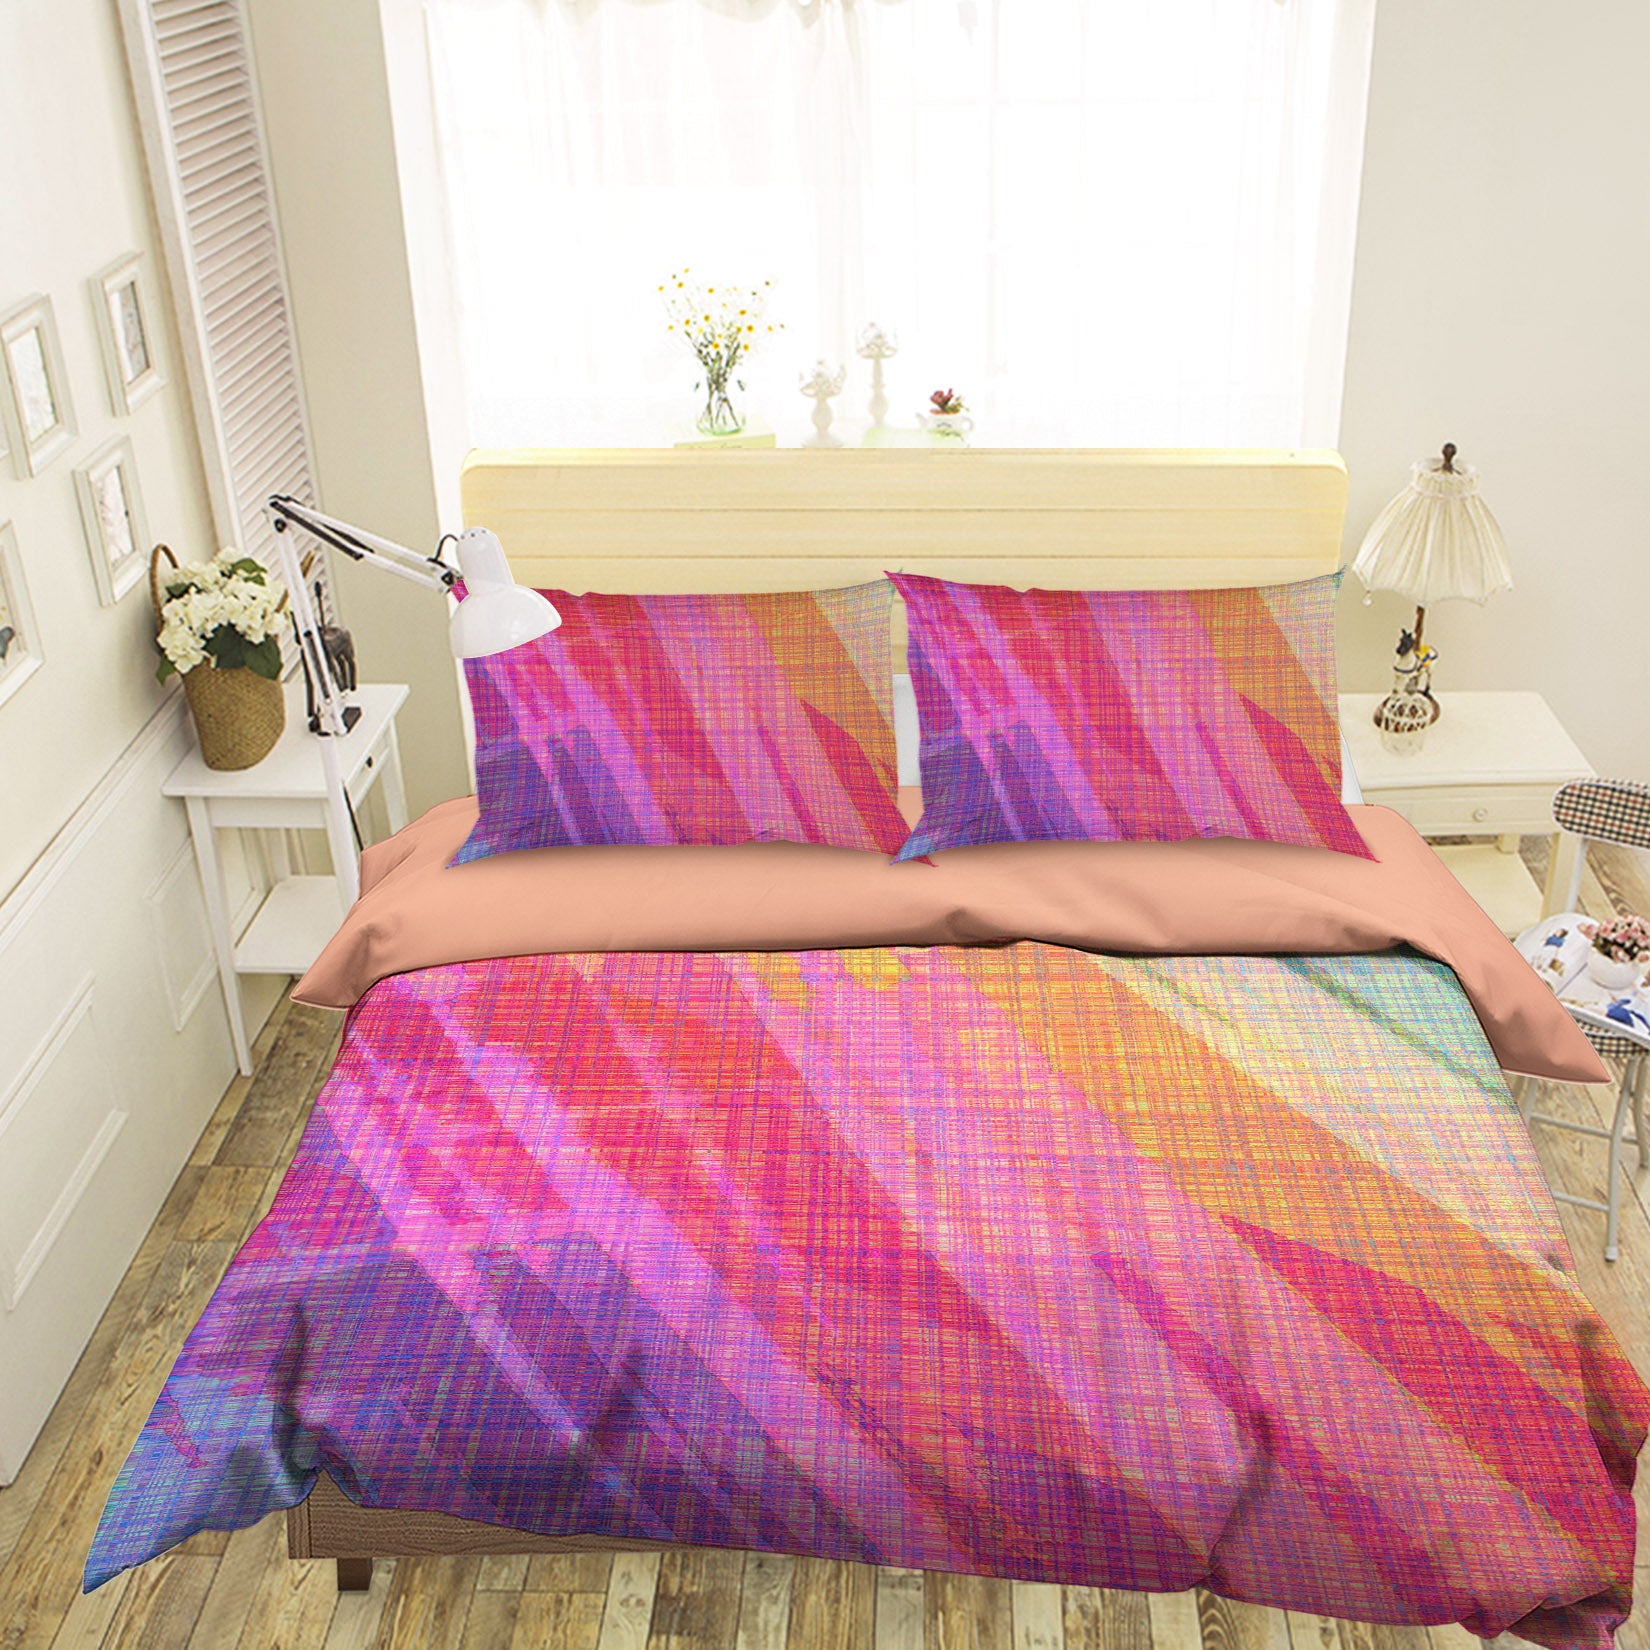 3D Abstract Rainbow 70002 Shandra Smith Bedding Bed Pillowcases Quilt